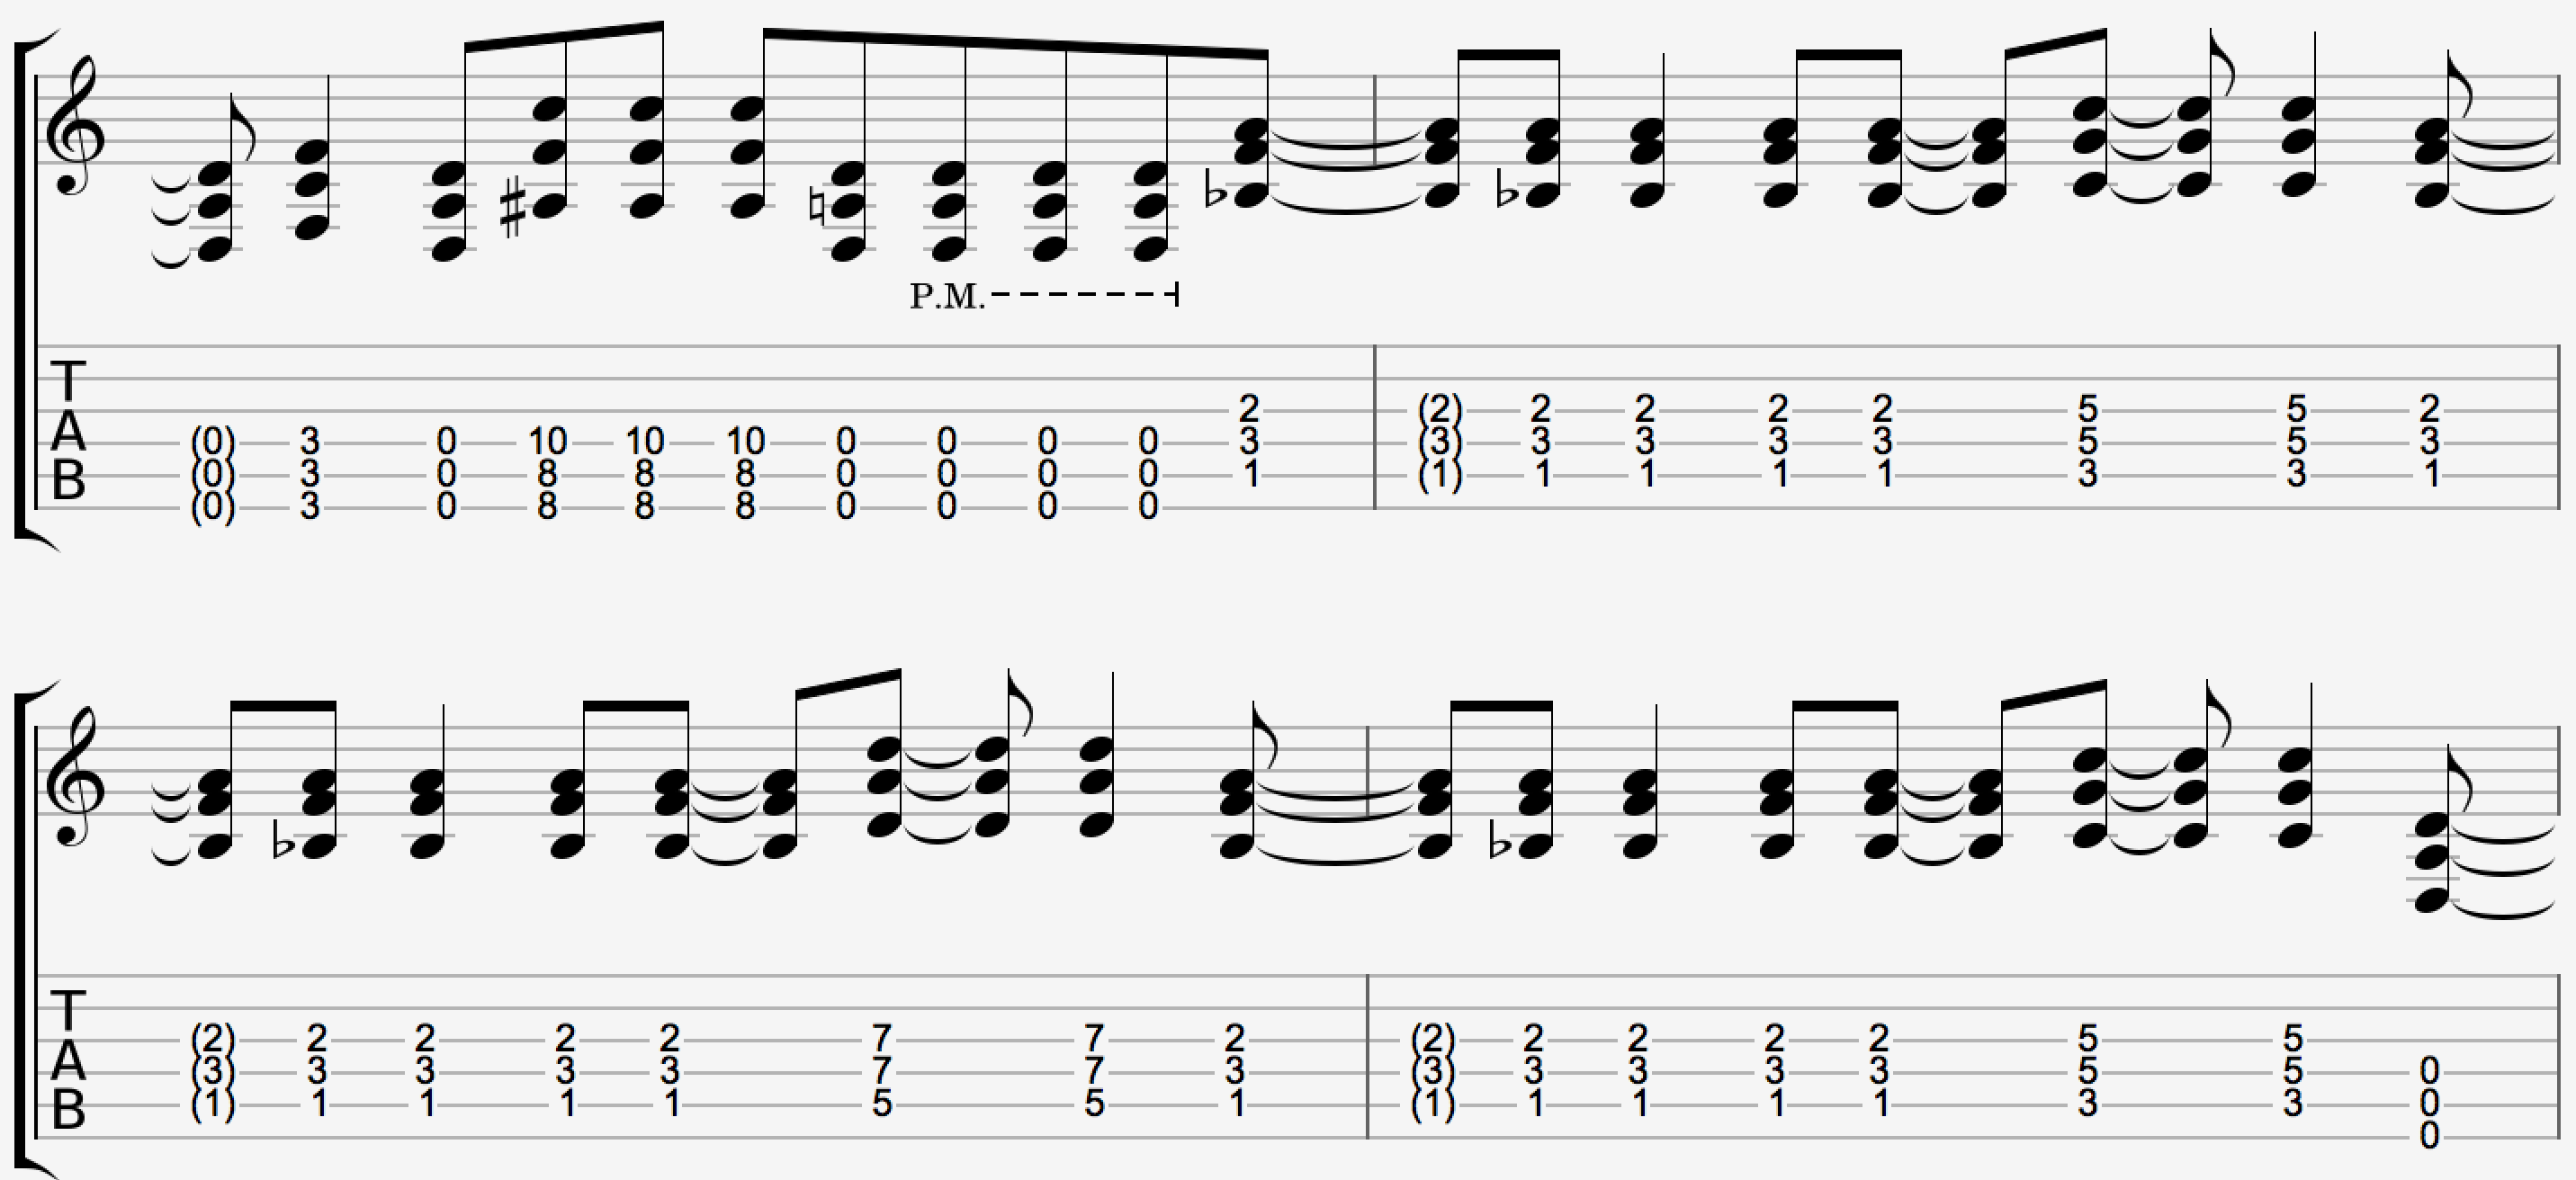 This Soundgarden song is so much fun to play. 